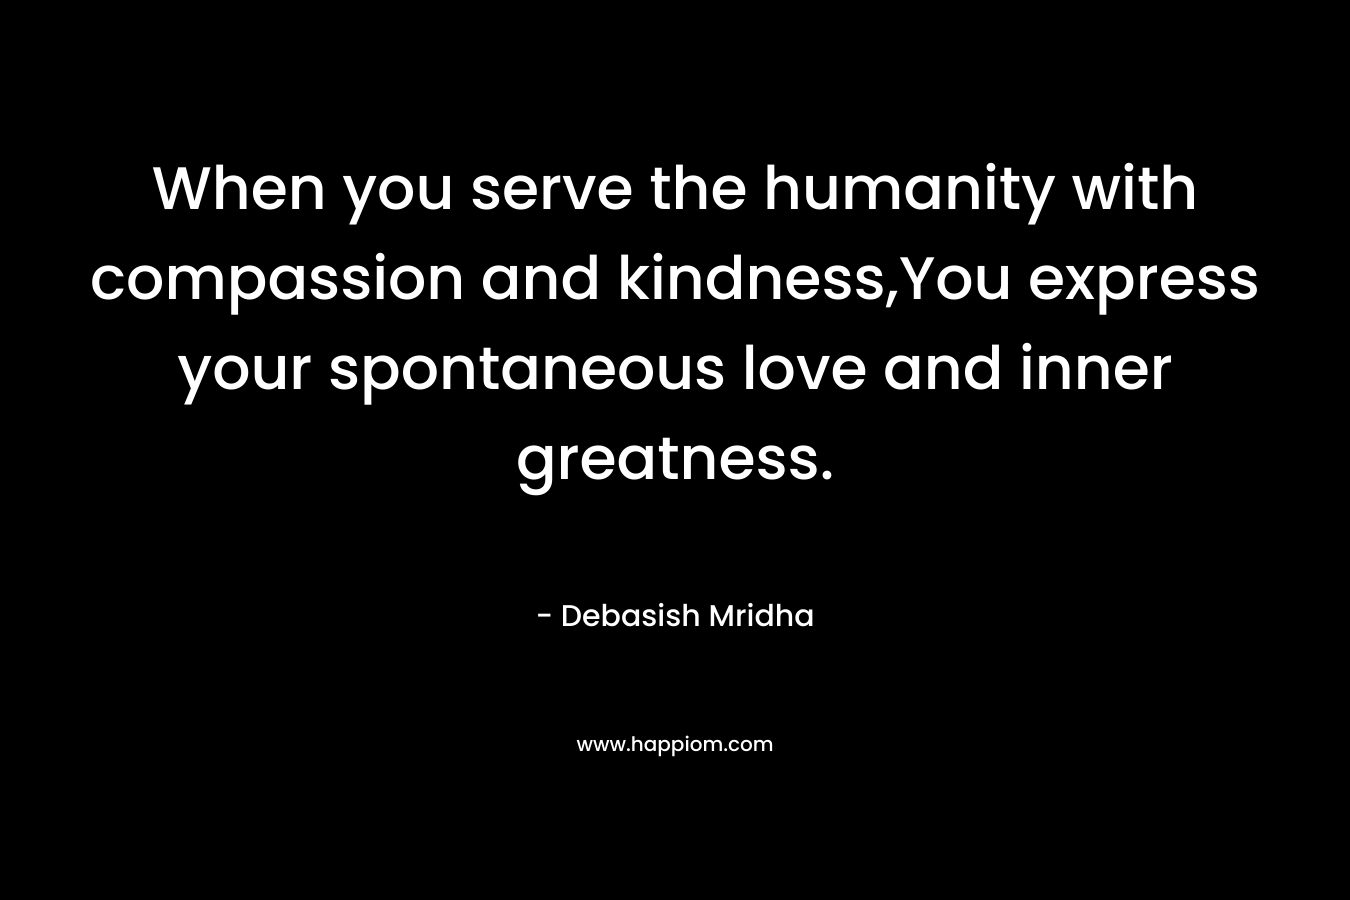 When you serve the humanity with compassion and kindness,You express your spontaneous love and inner greatness.